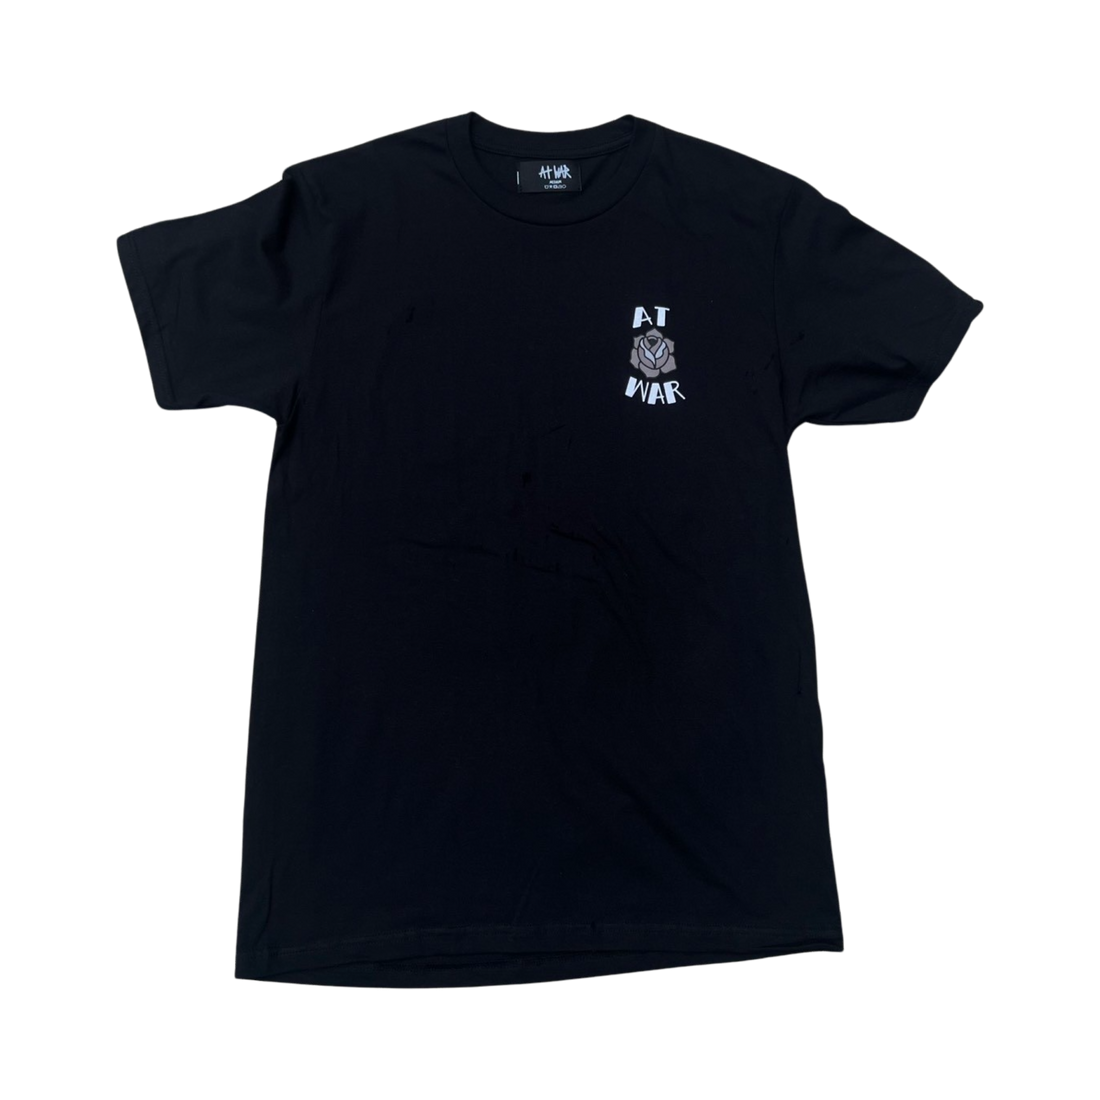 Birds of a Feather T-Shirt (BLACK)